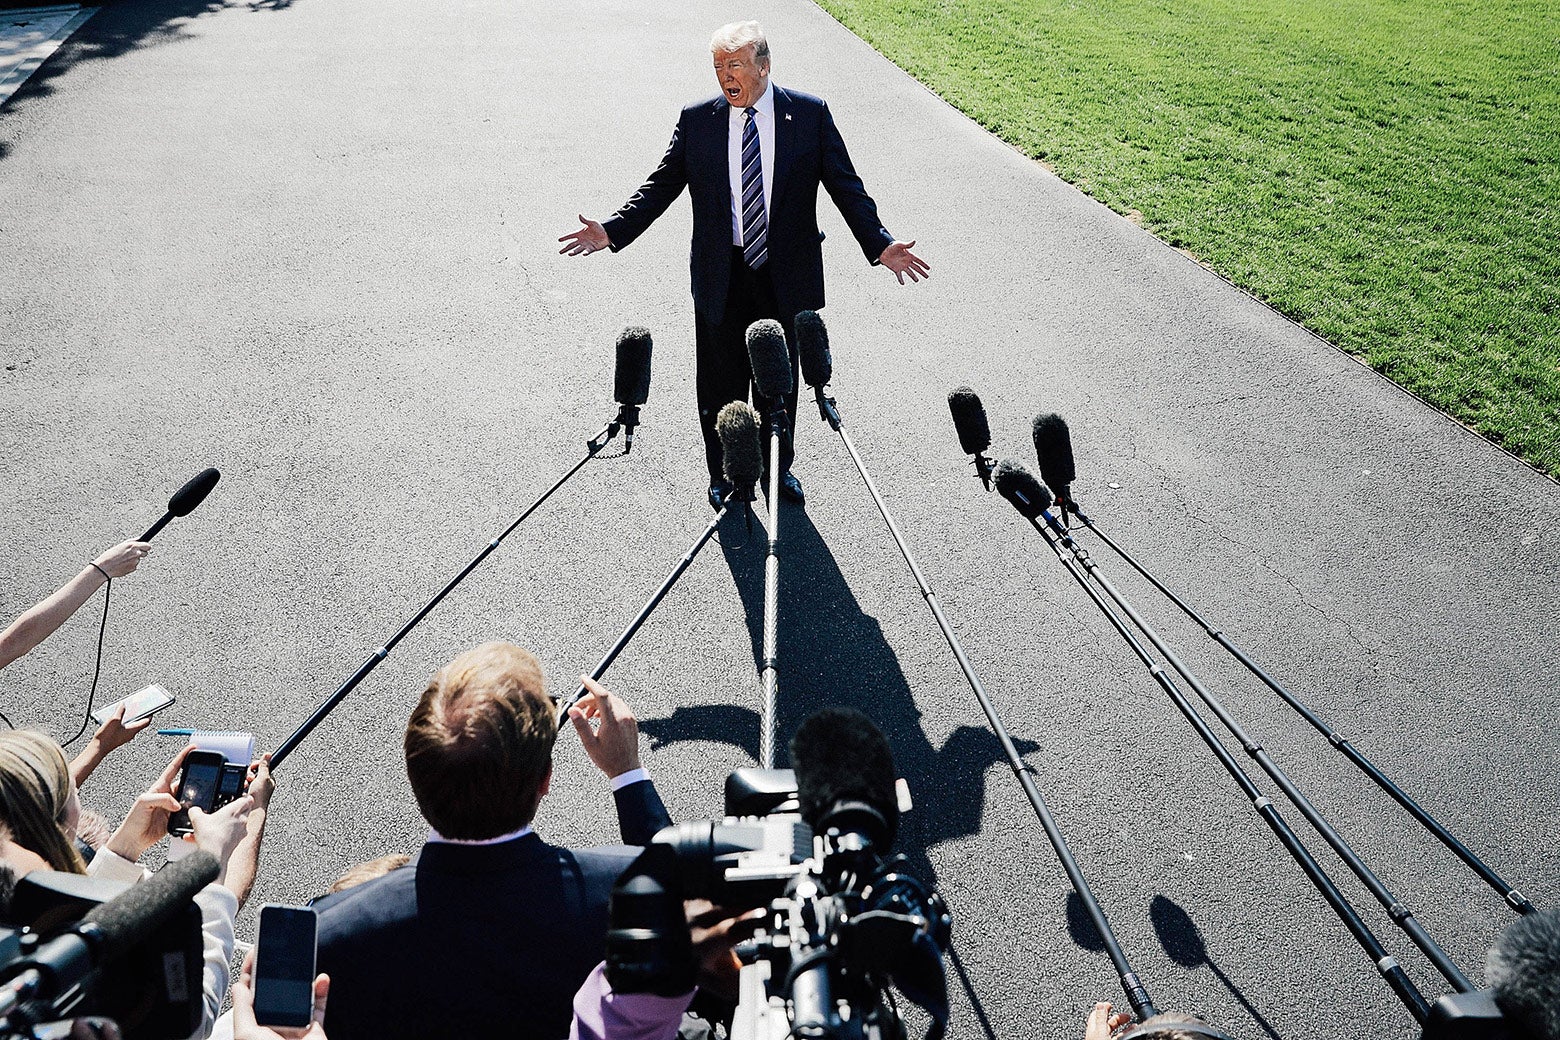 President Donald Trump talks to members of the media before departing the White House on Friday in Washington.